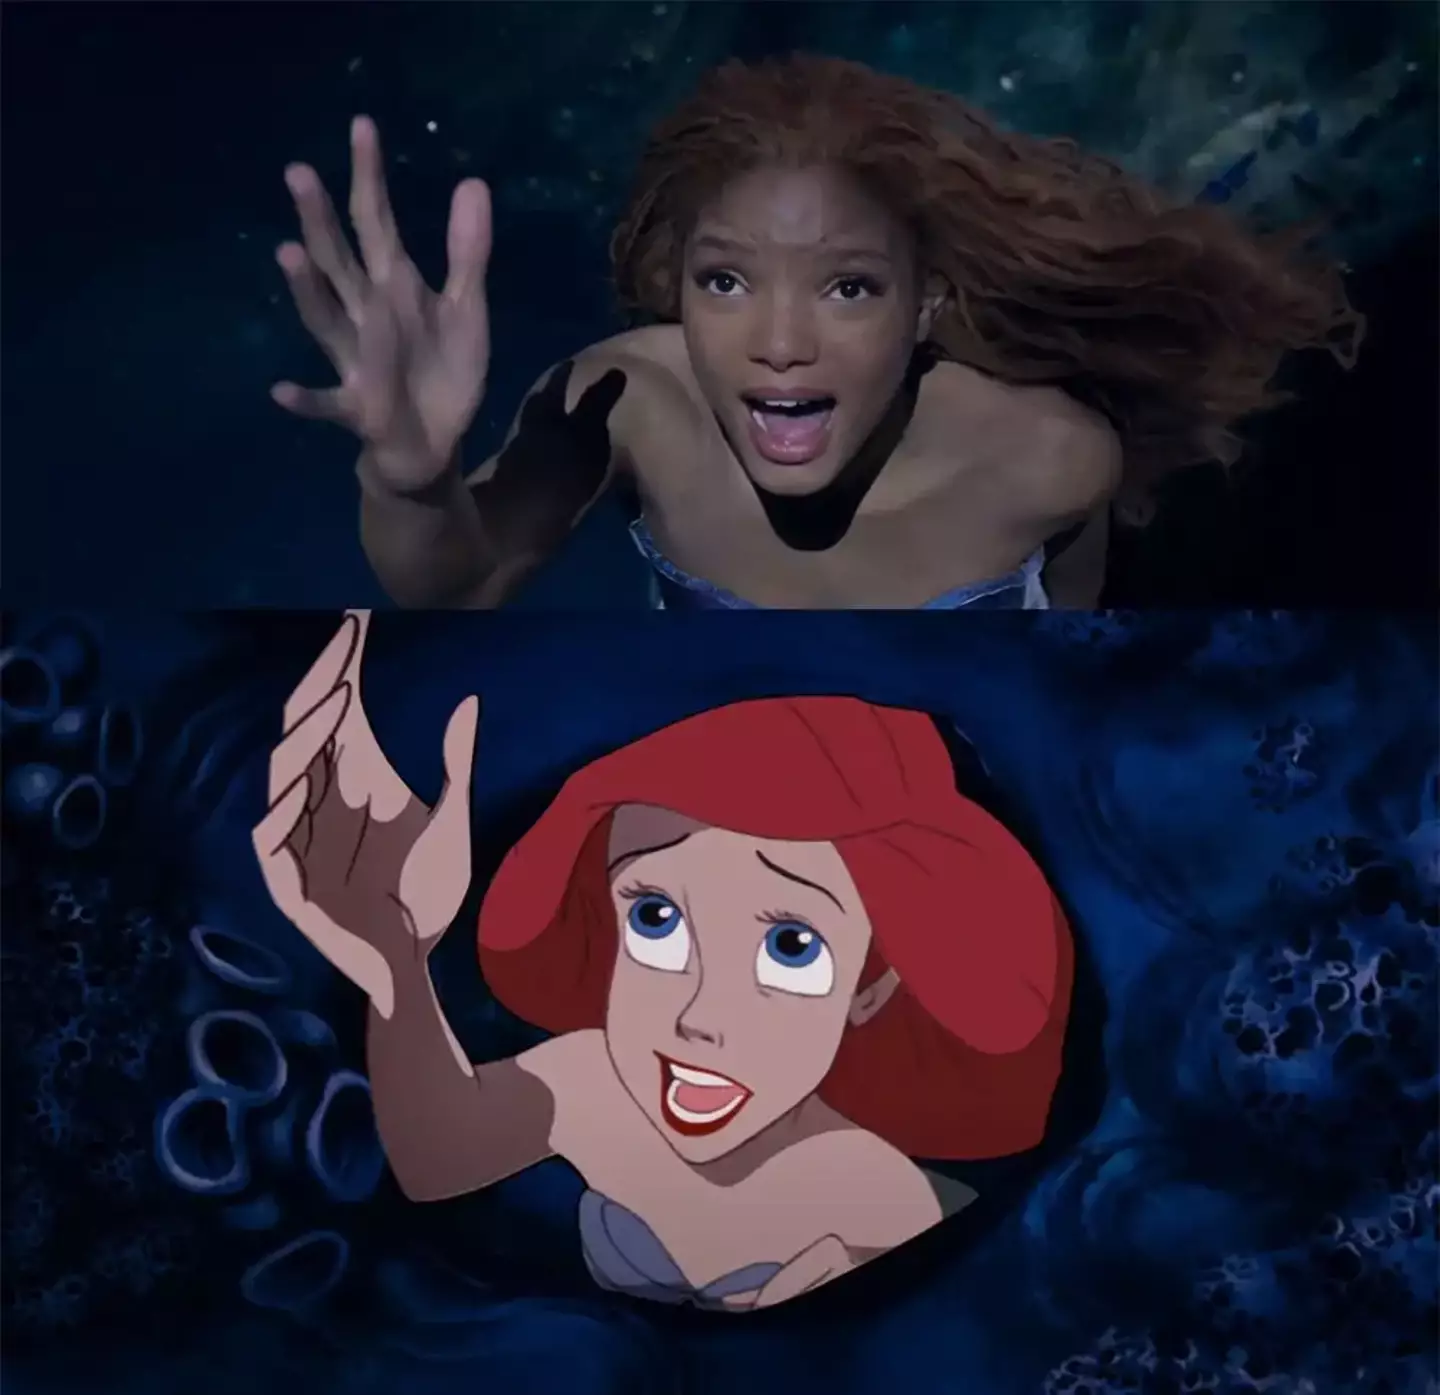 "Part of your wooooorrrlllldd!" Yup, the live action Little Mermaid does draw plenty of inspiration from the predecessor.